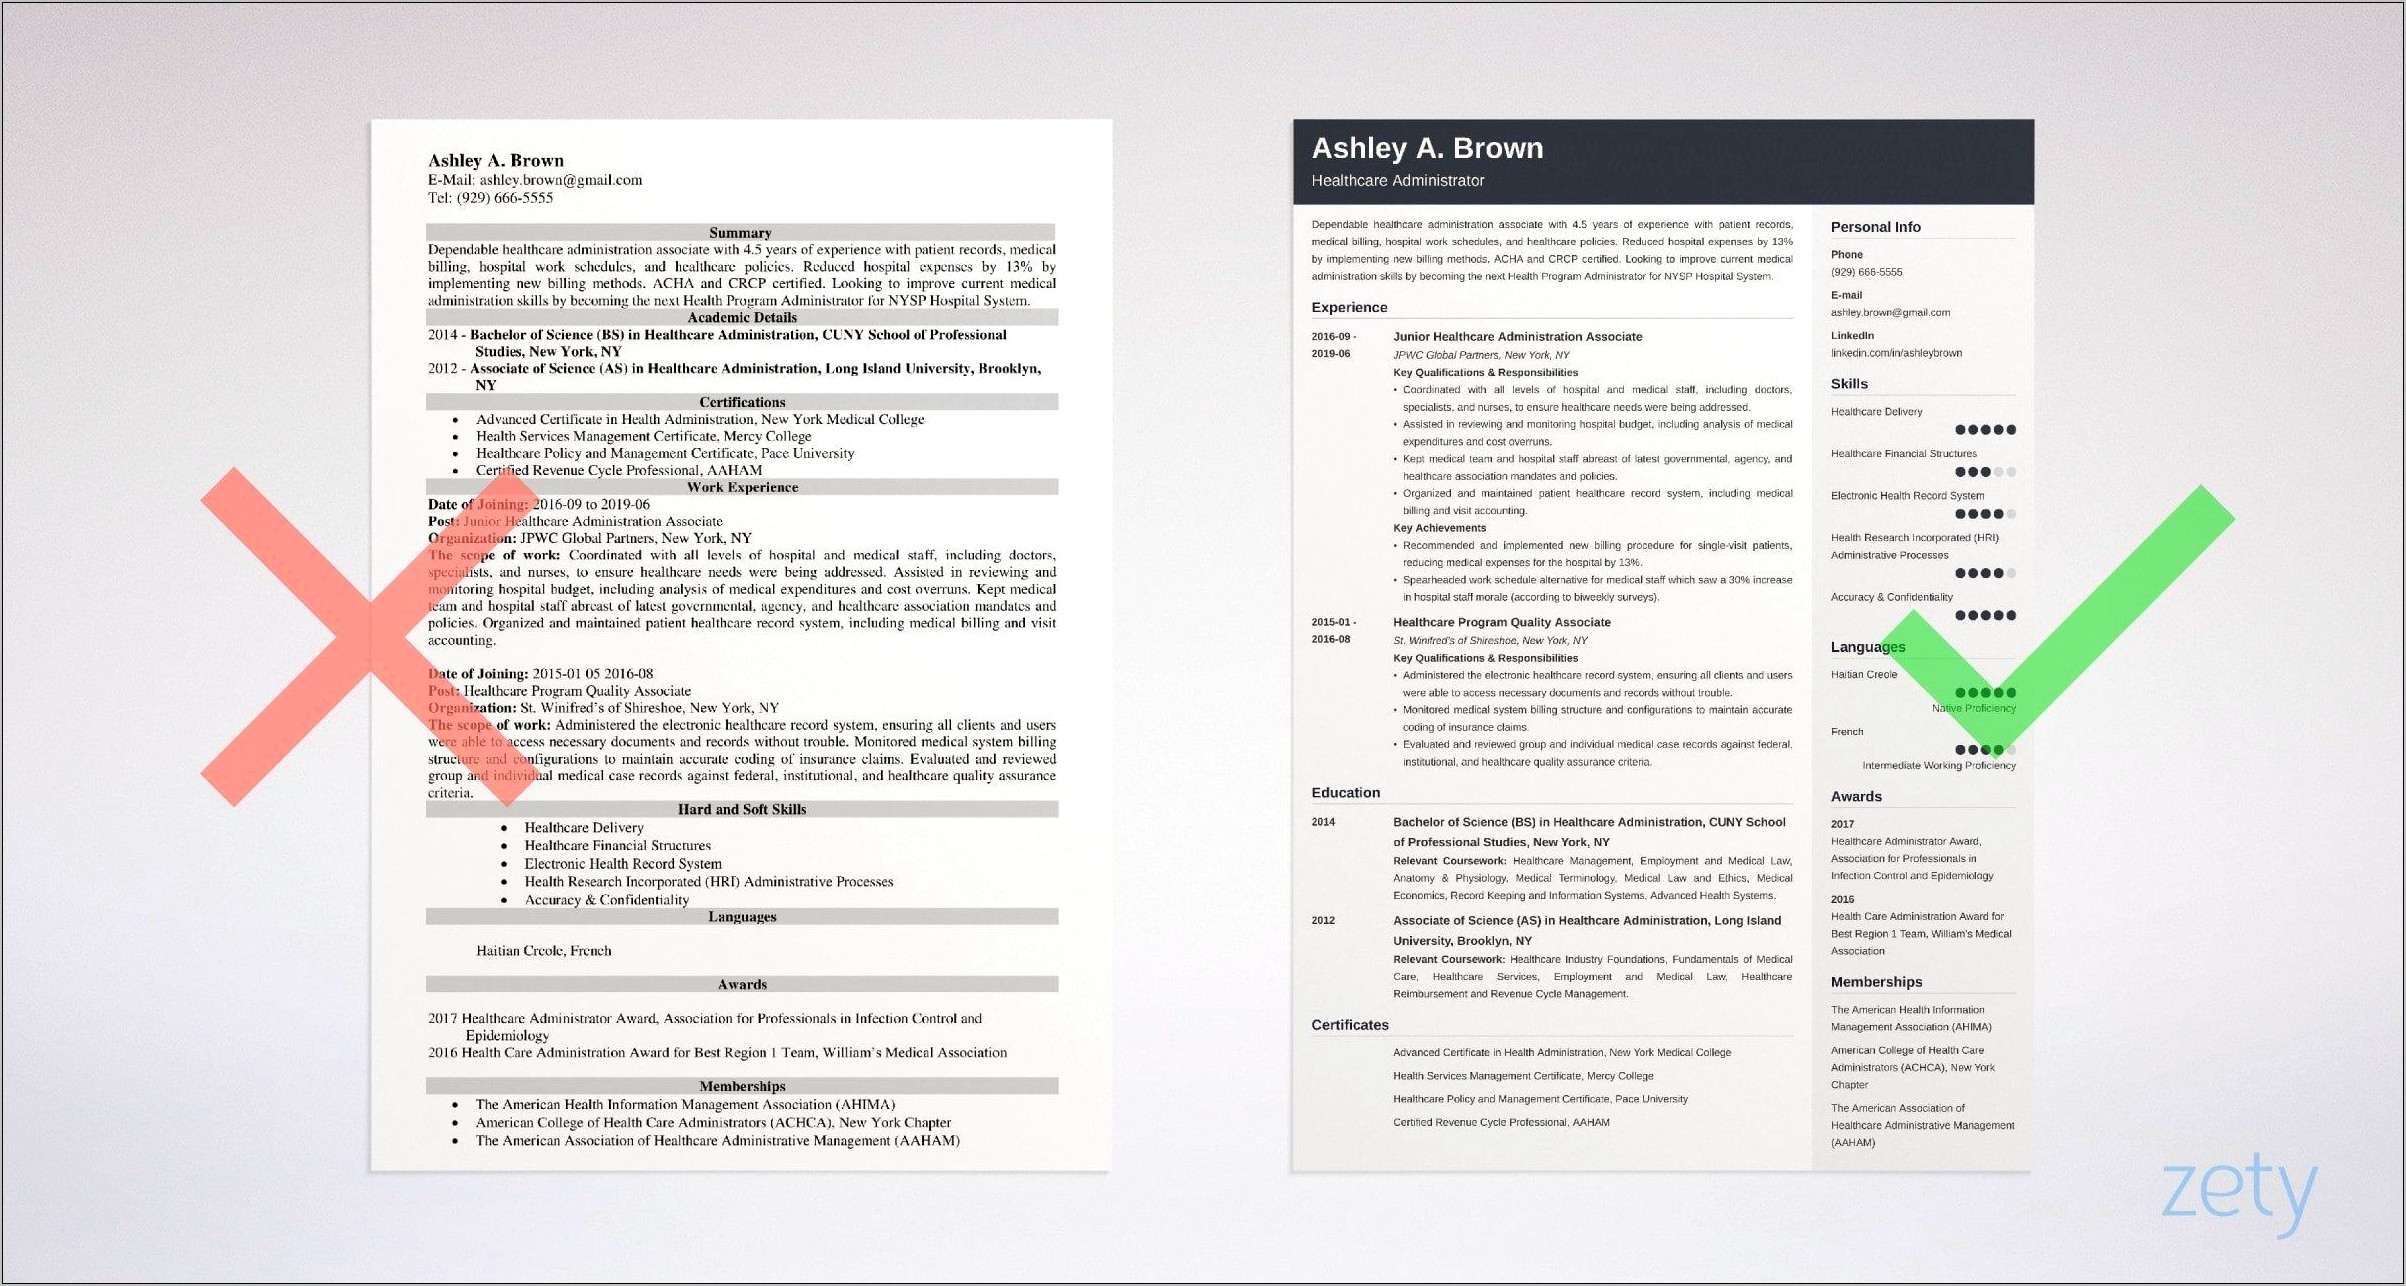 Examples Of Skills For Healthcare Resume